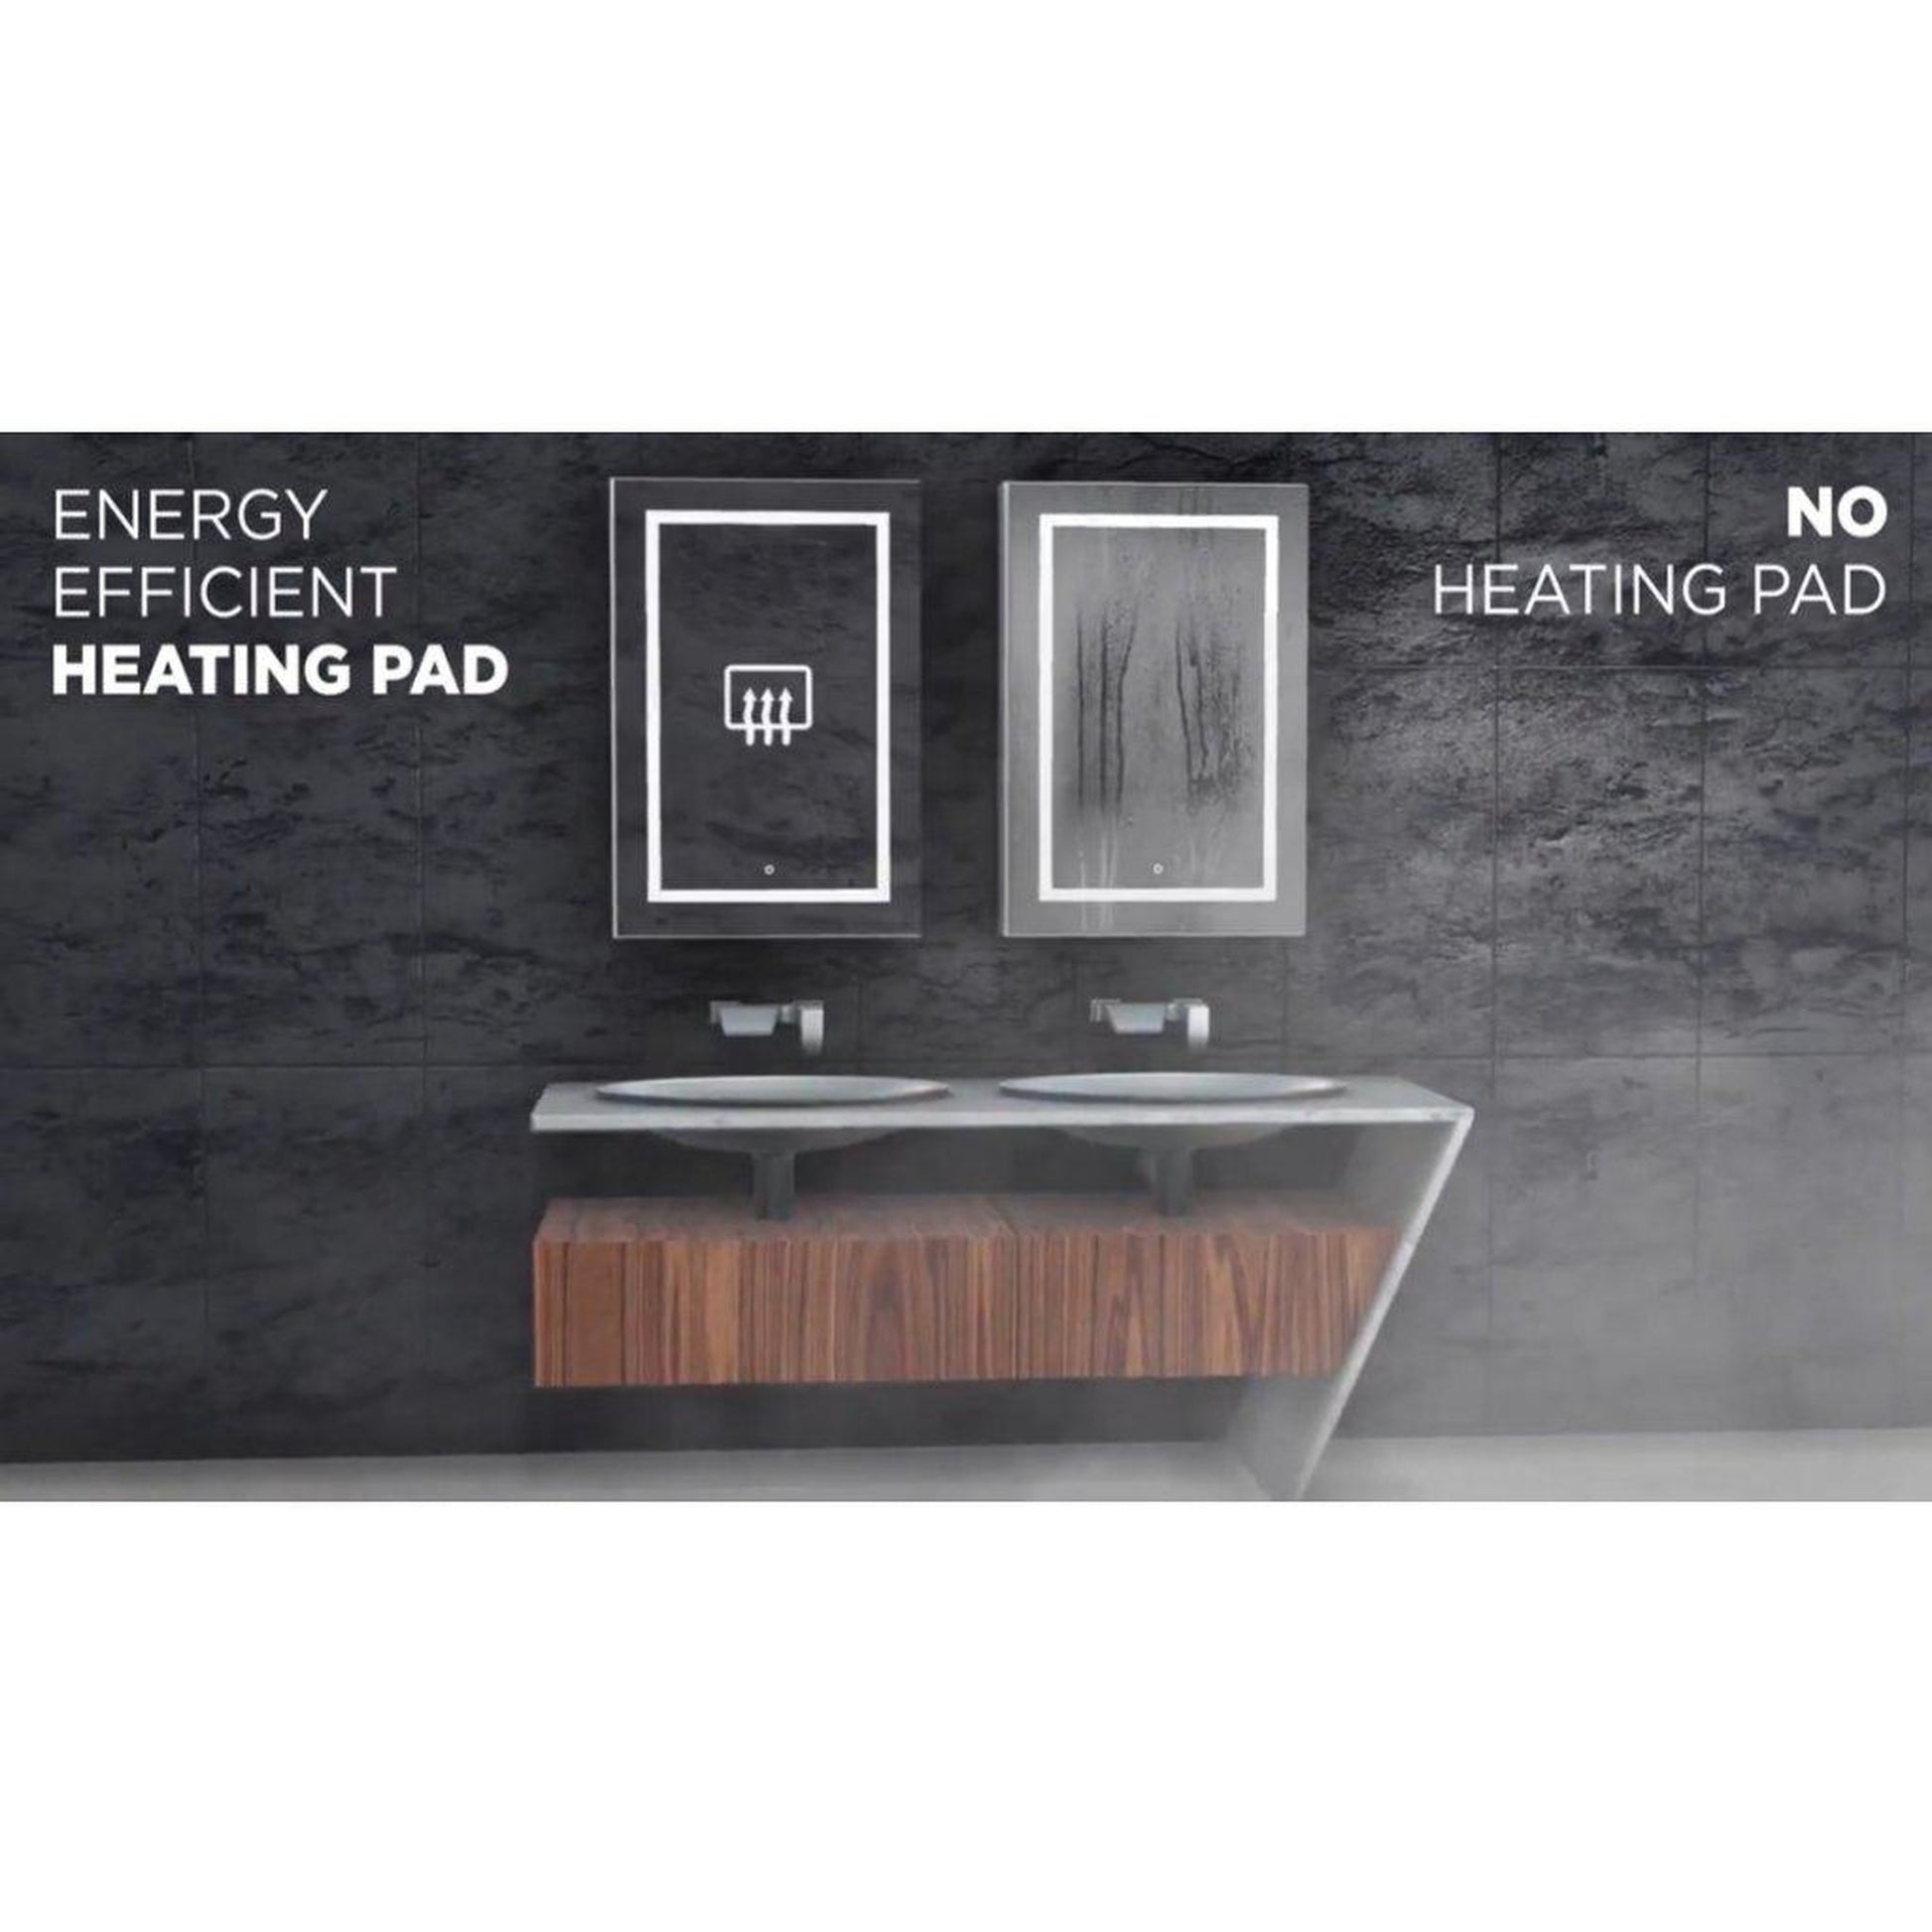 Krugg Reflections Sol 42" x 42" 5000K Round Wall-Mounted Illuminated Silver Backed LED Mirror With Built-in Defogger and Touch Sensor On/Off Built-in Dimmer